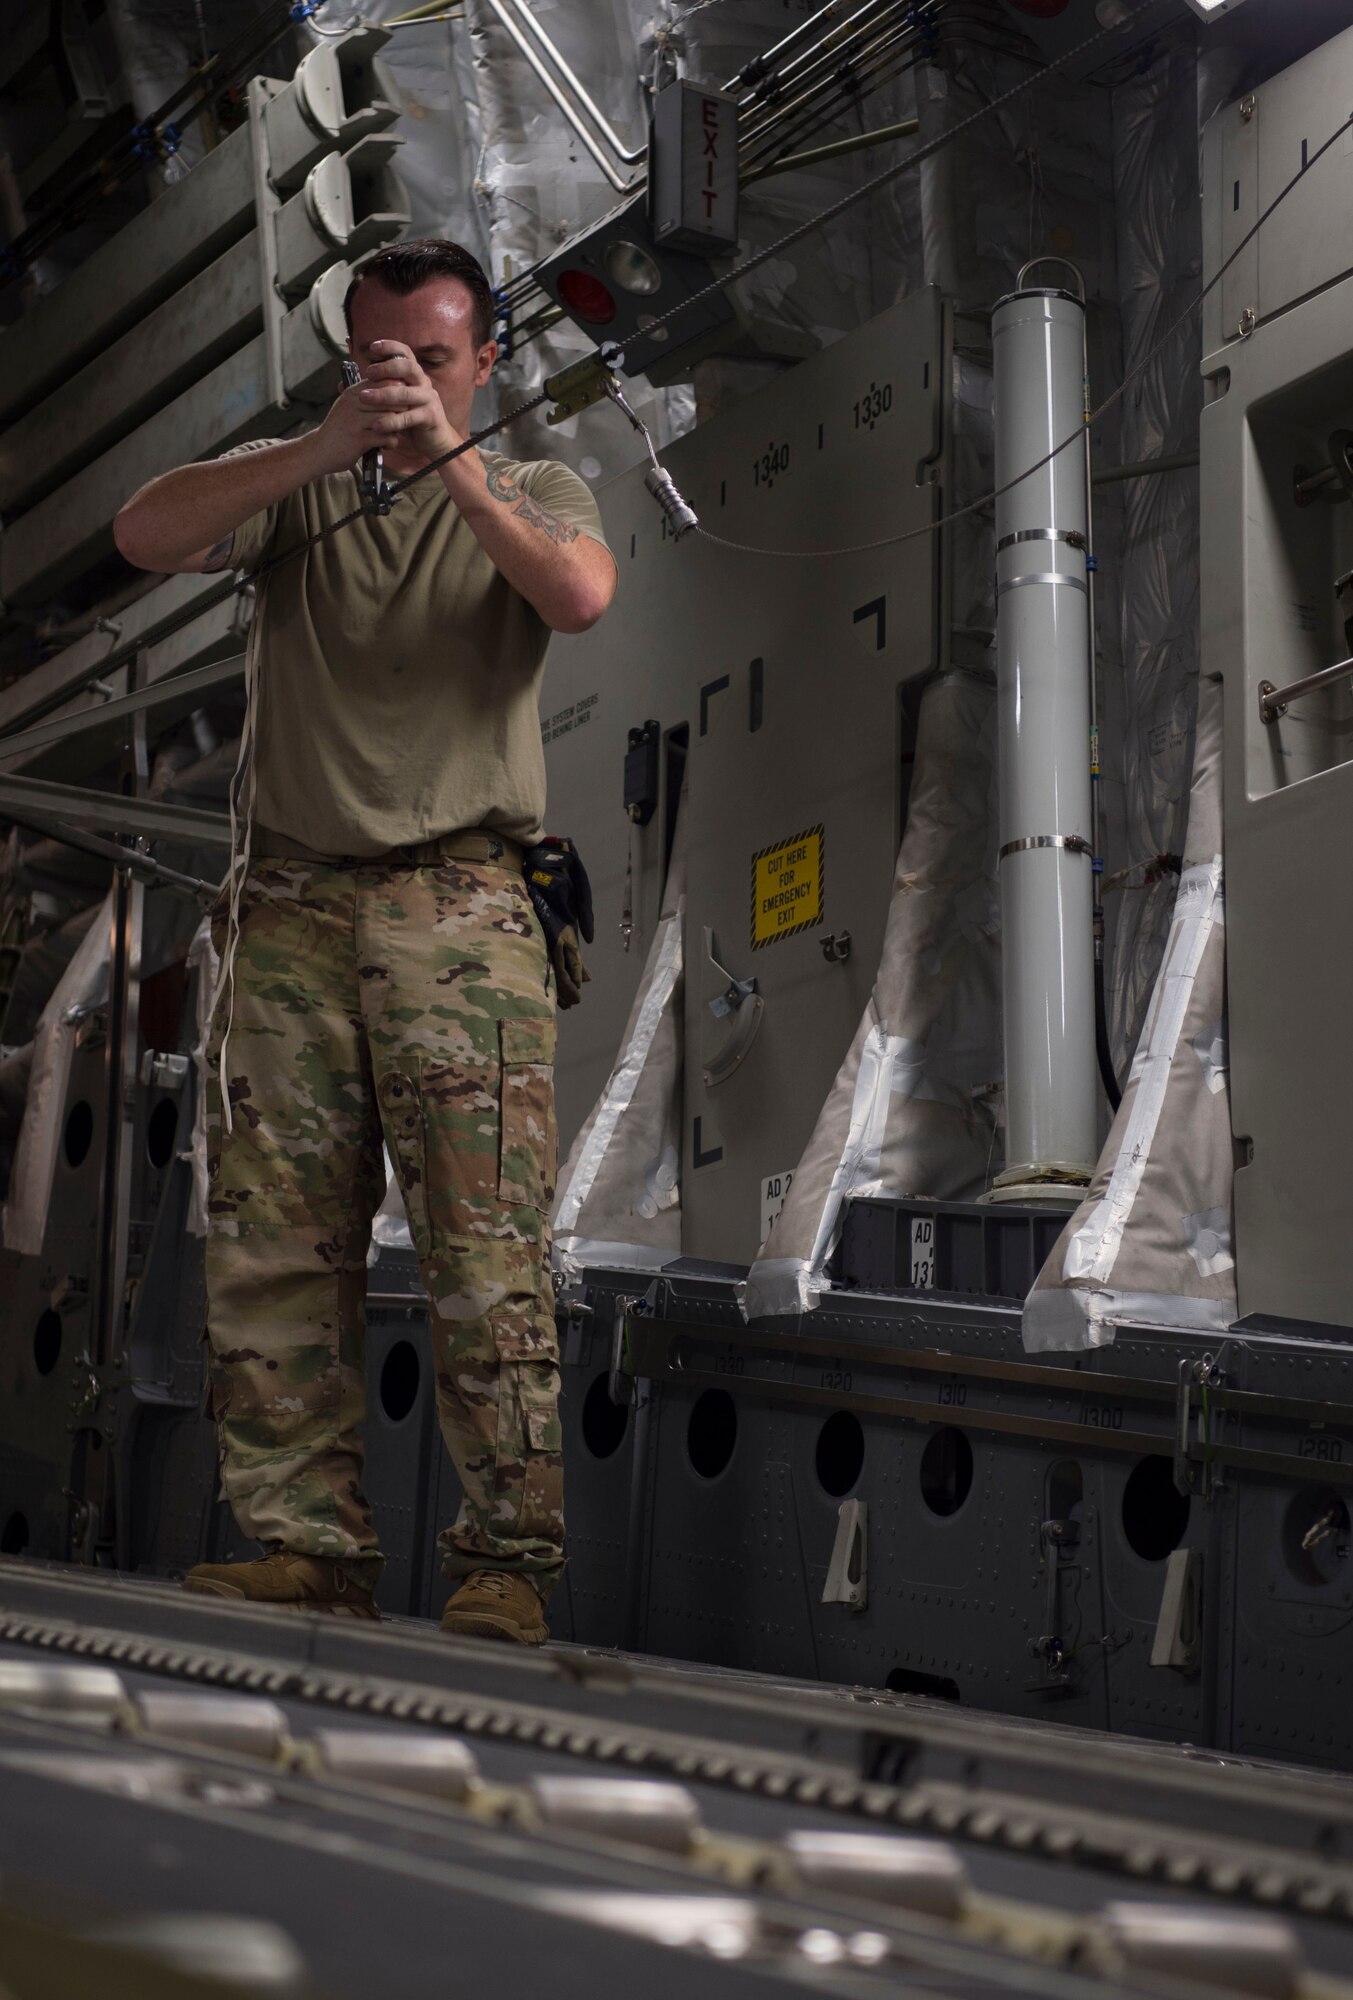 Senior Airman Ryan Stefanowicz, 535th Airlift Squadron loadmaster, secures a line for a container delivery system on board a C-17 Globemaster III during Big Island Drop Week, Joint Base Pearl Harbor-Hickam, Hawaii Nov. 8, 2018. Big Island Drop Week helps prepare the 15th Wing to meet future operational needs and accomplish the mission of employing combat power across the Indo-Pacific. (U.S. Air Force photo by Tech. Sgt. Heather Redman)